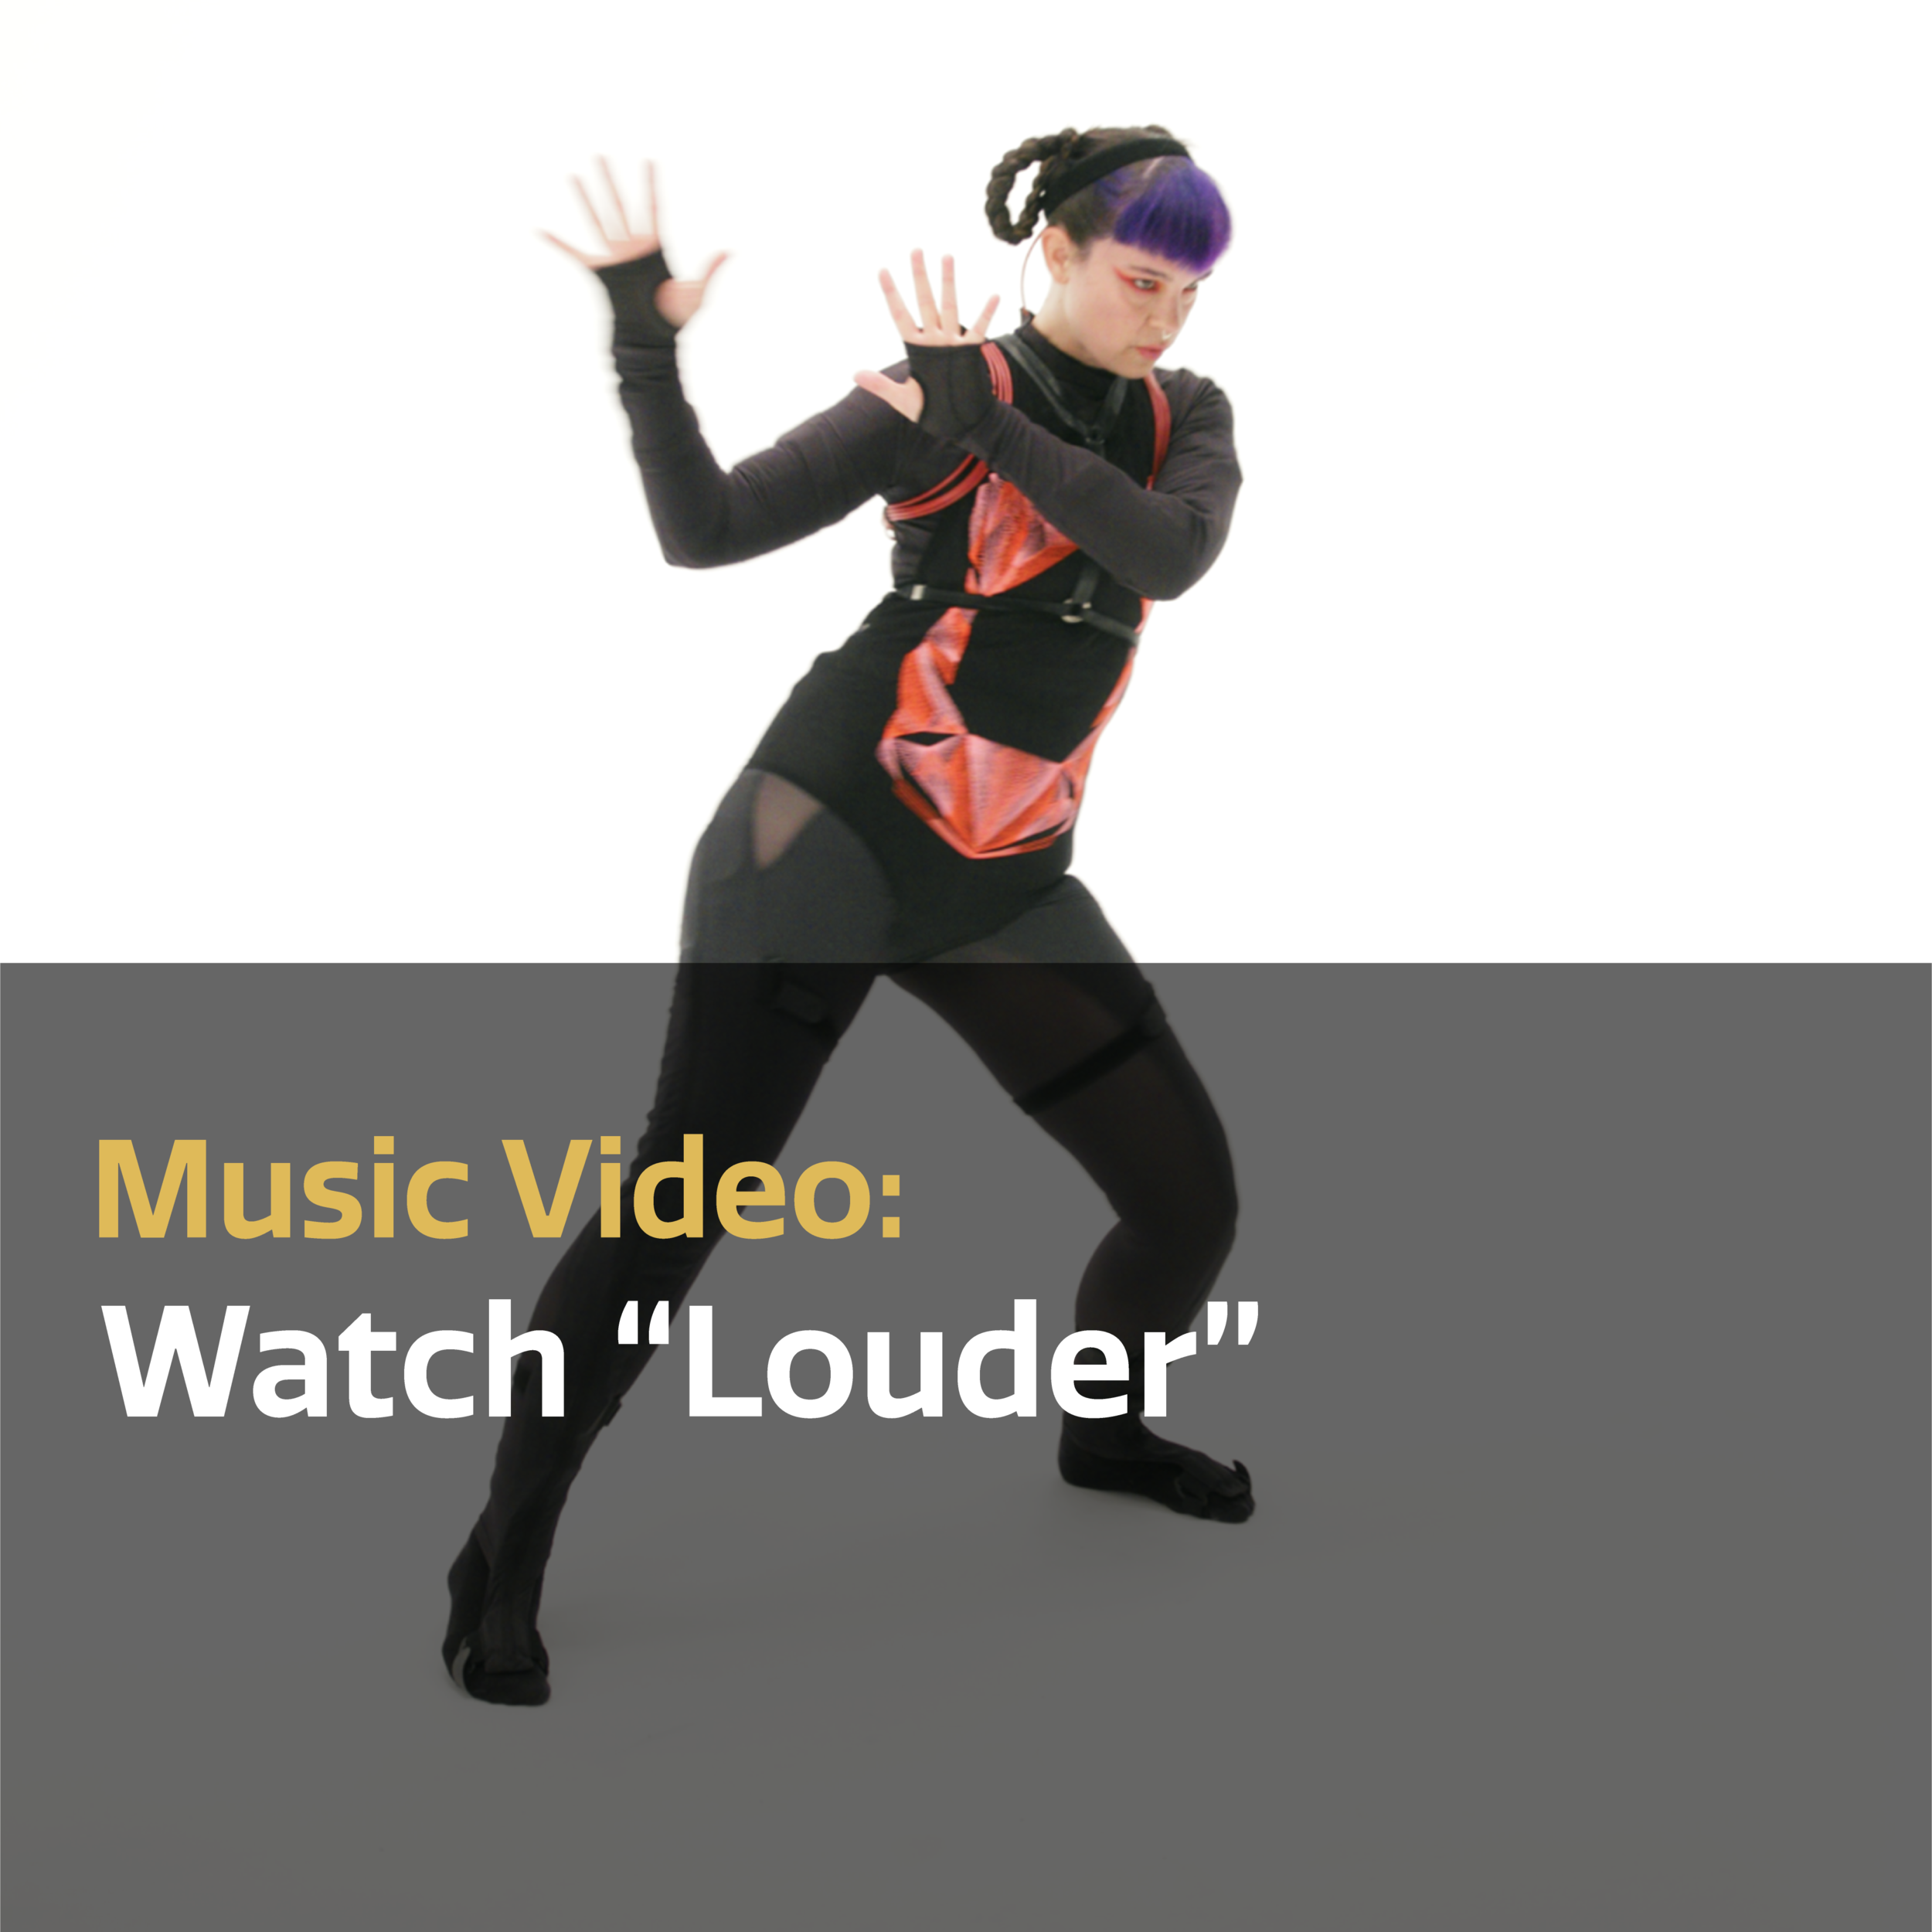 Watch the Louder video